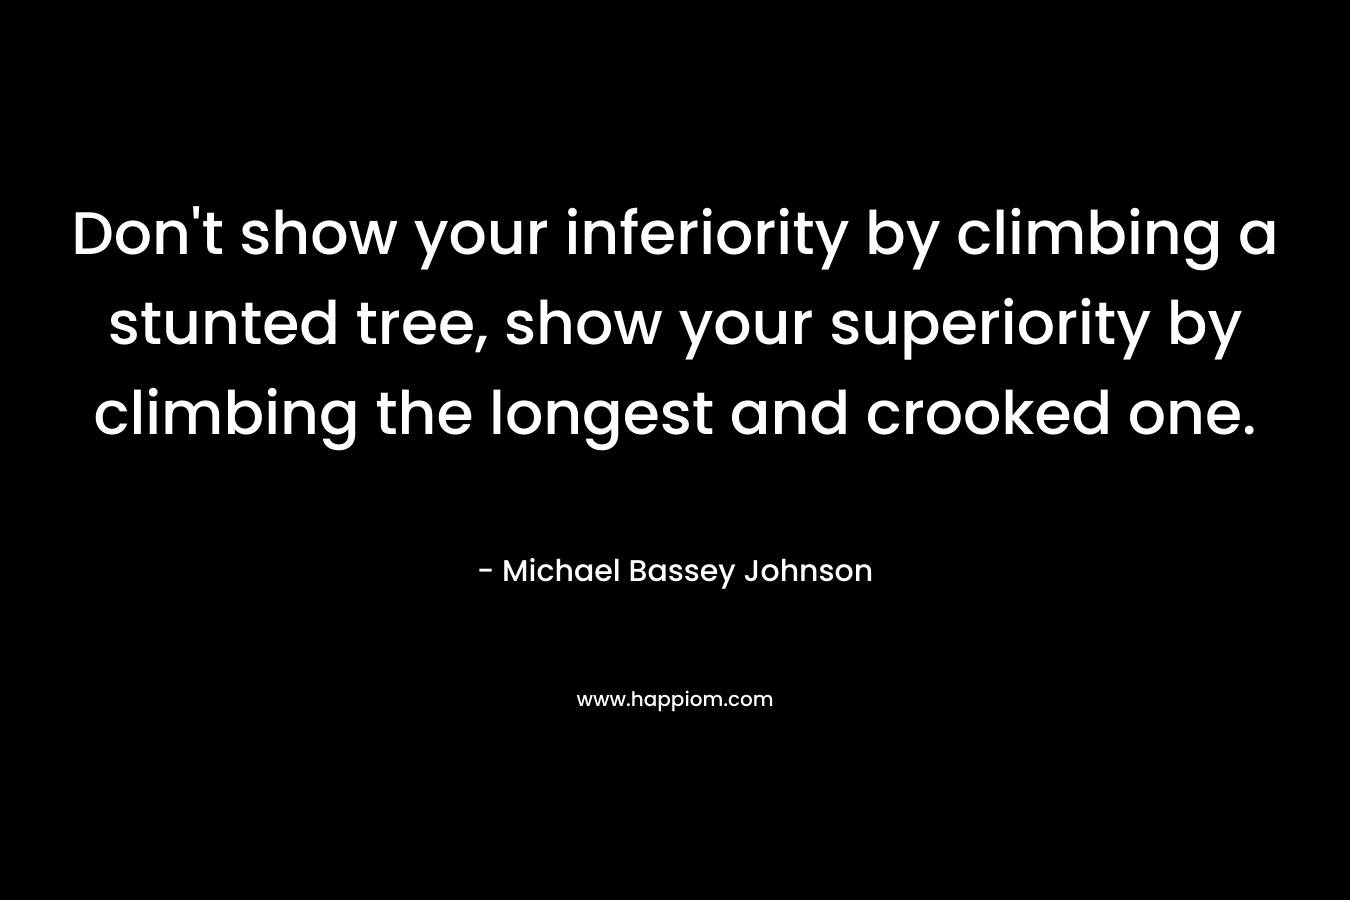 Don’t show your inferiority by climbing a stunted tree, show your superiority by climbing the longest and crooked one. – Michael Bassey Johnson